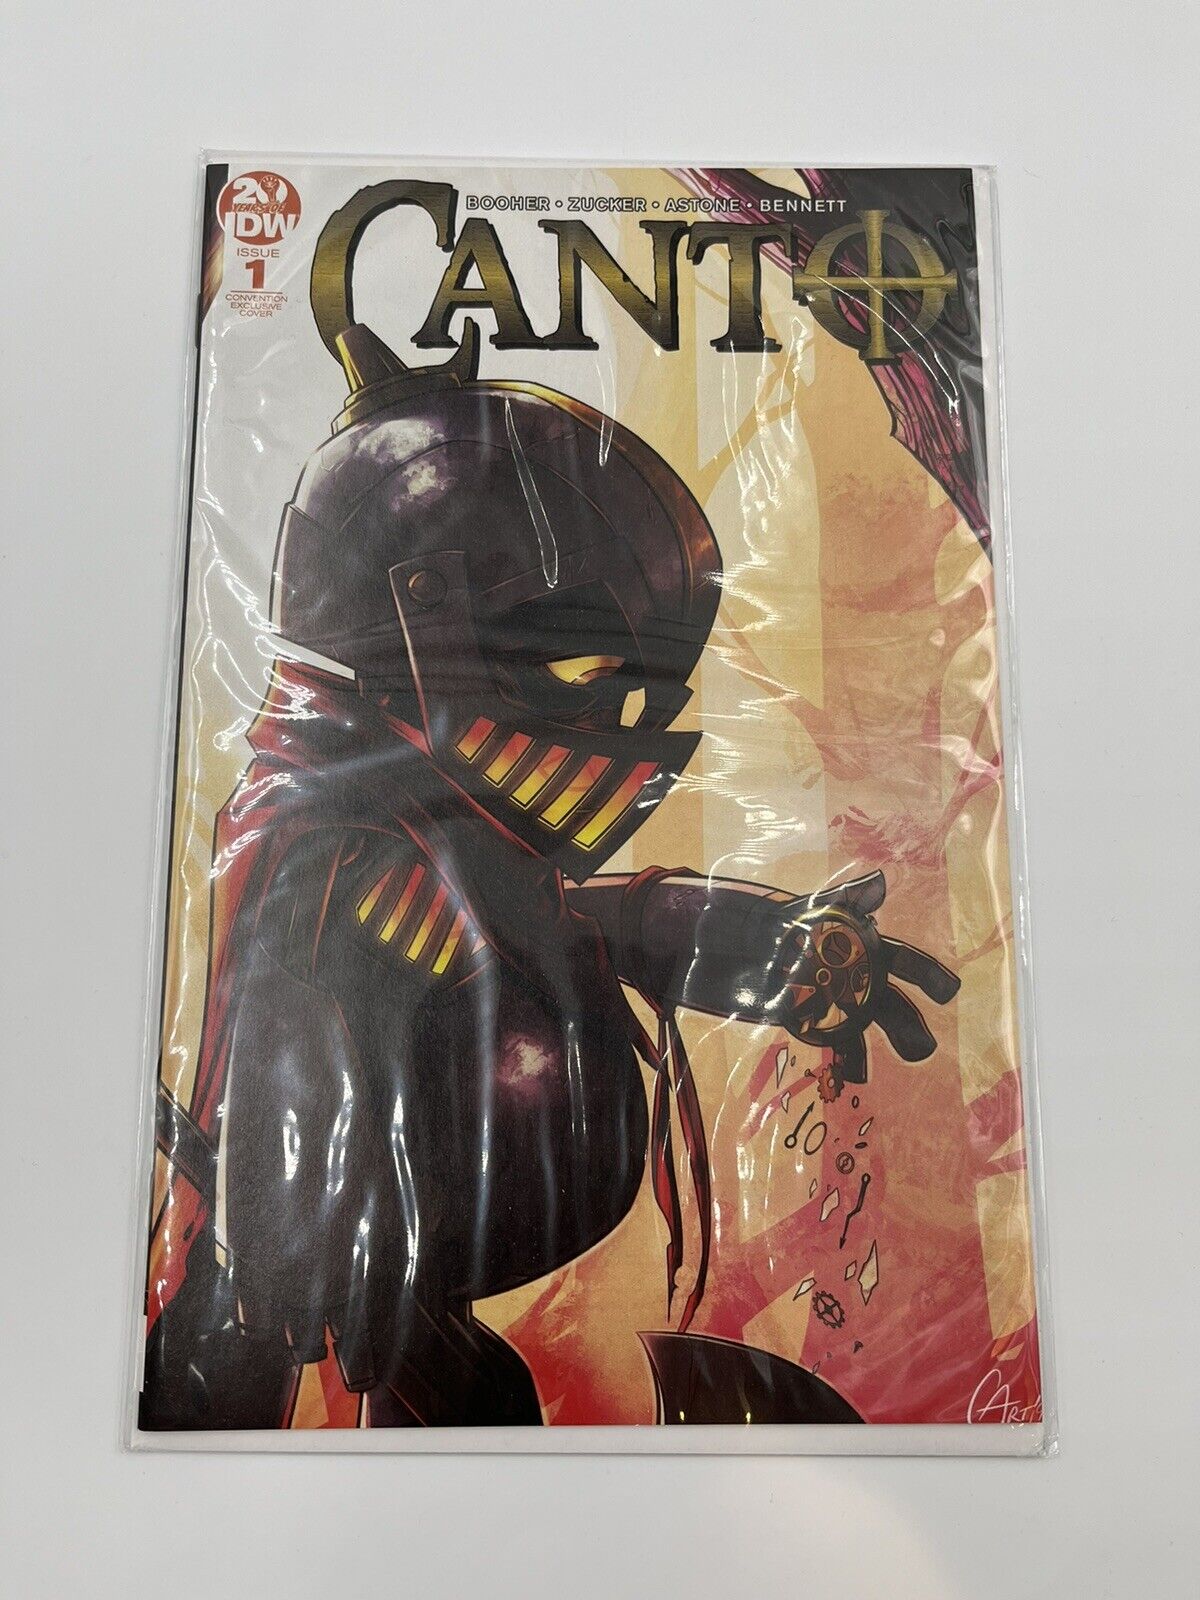 Canto 1 3rd Print NYCC Convention Exclusive Variant 2019 IDW NM+